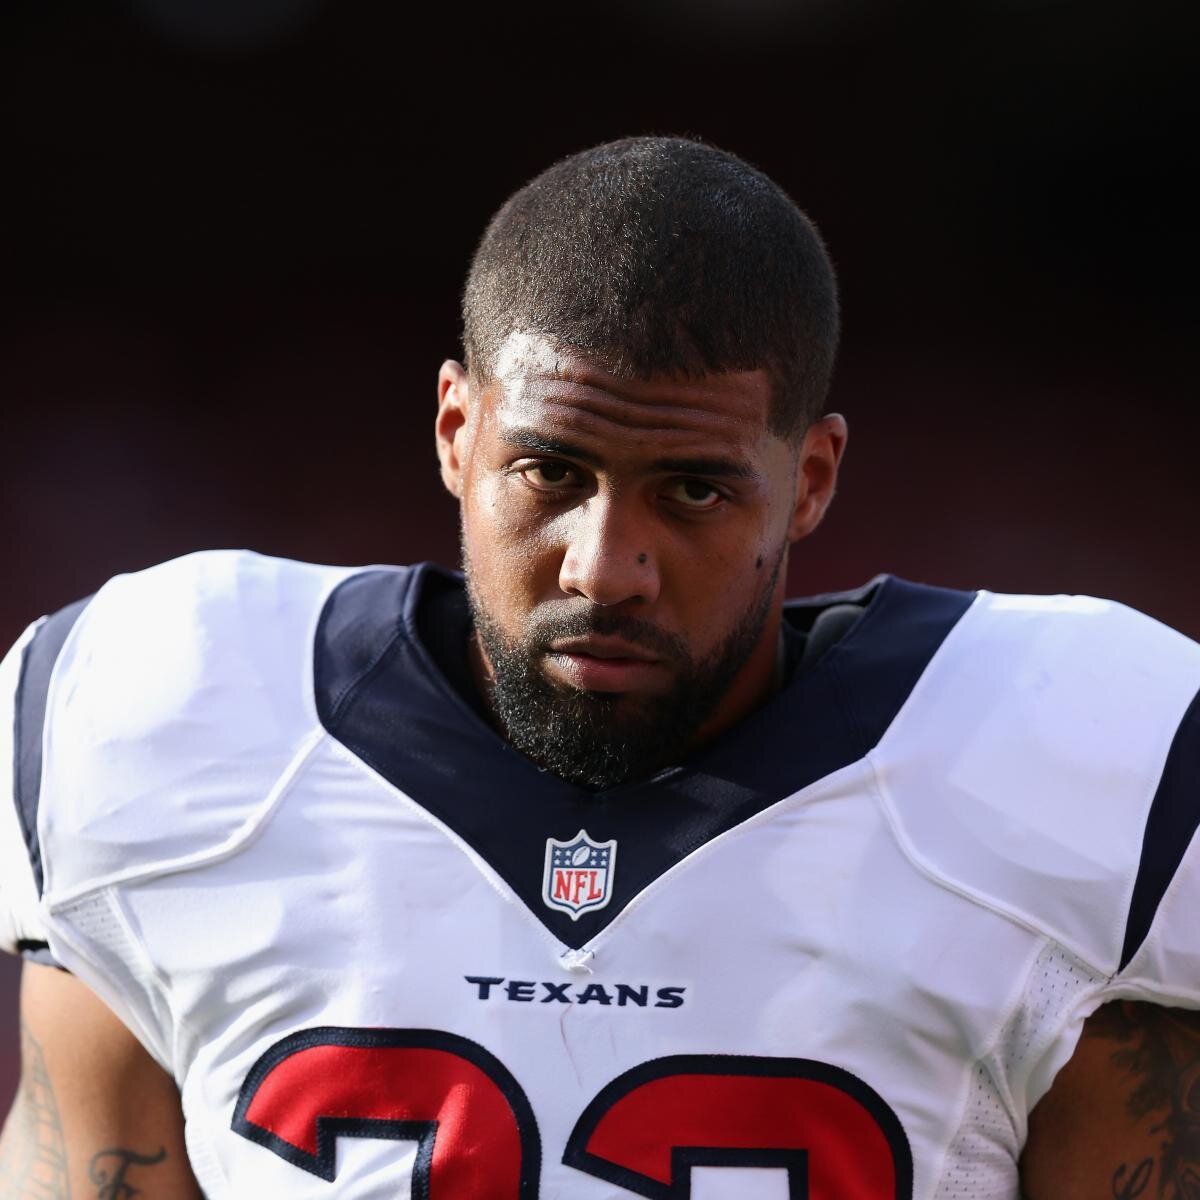 hi-res-183648705-running-back-arian-foster-of-the-houston-texans-looks_crop_exact.jpg